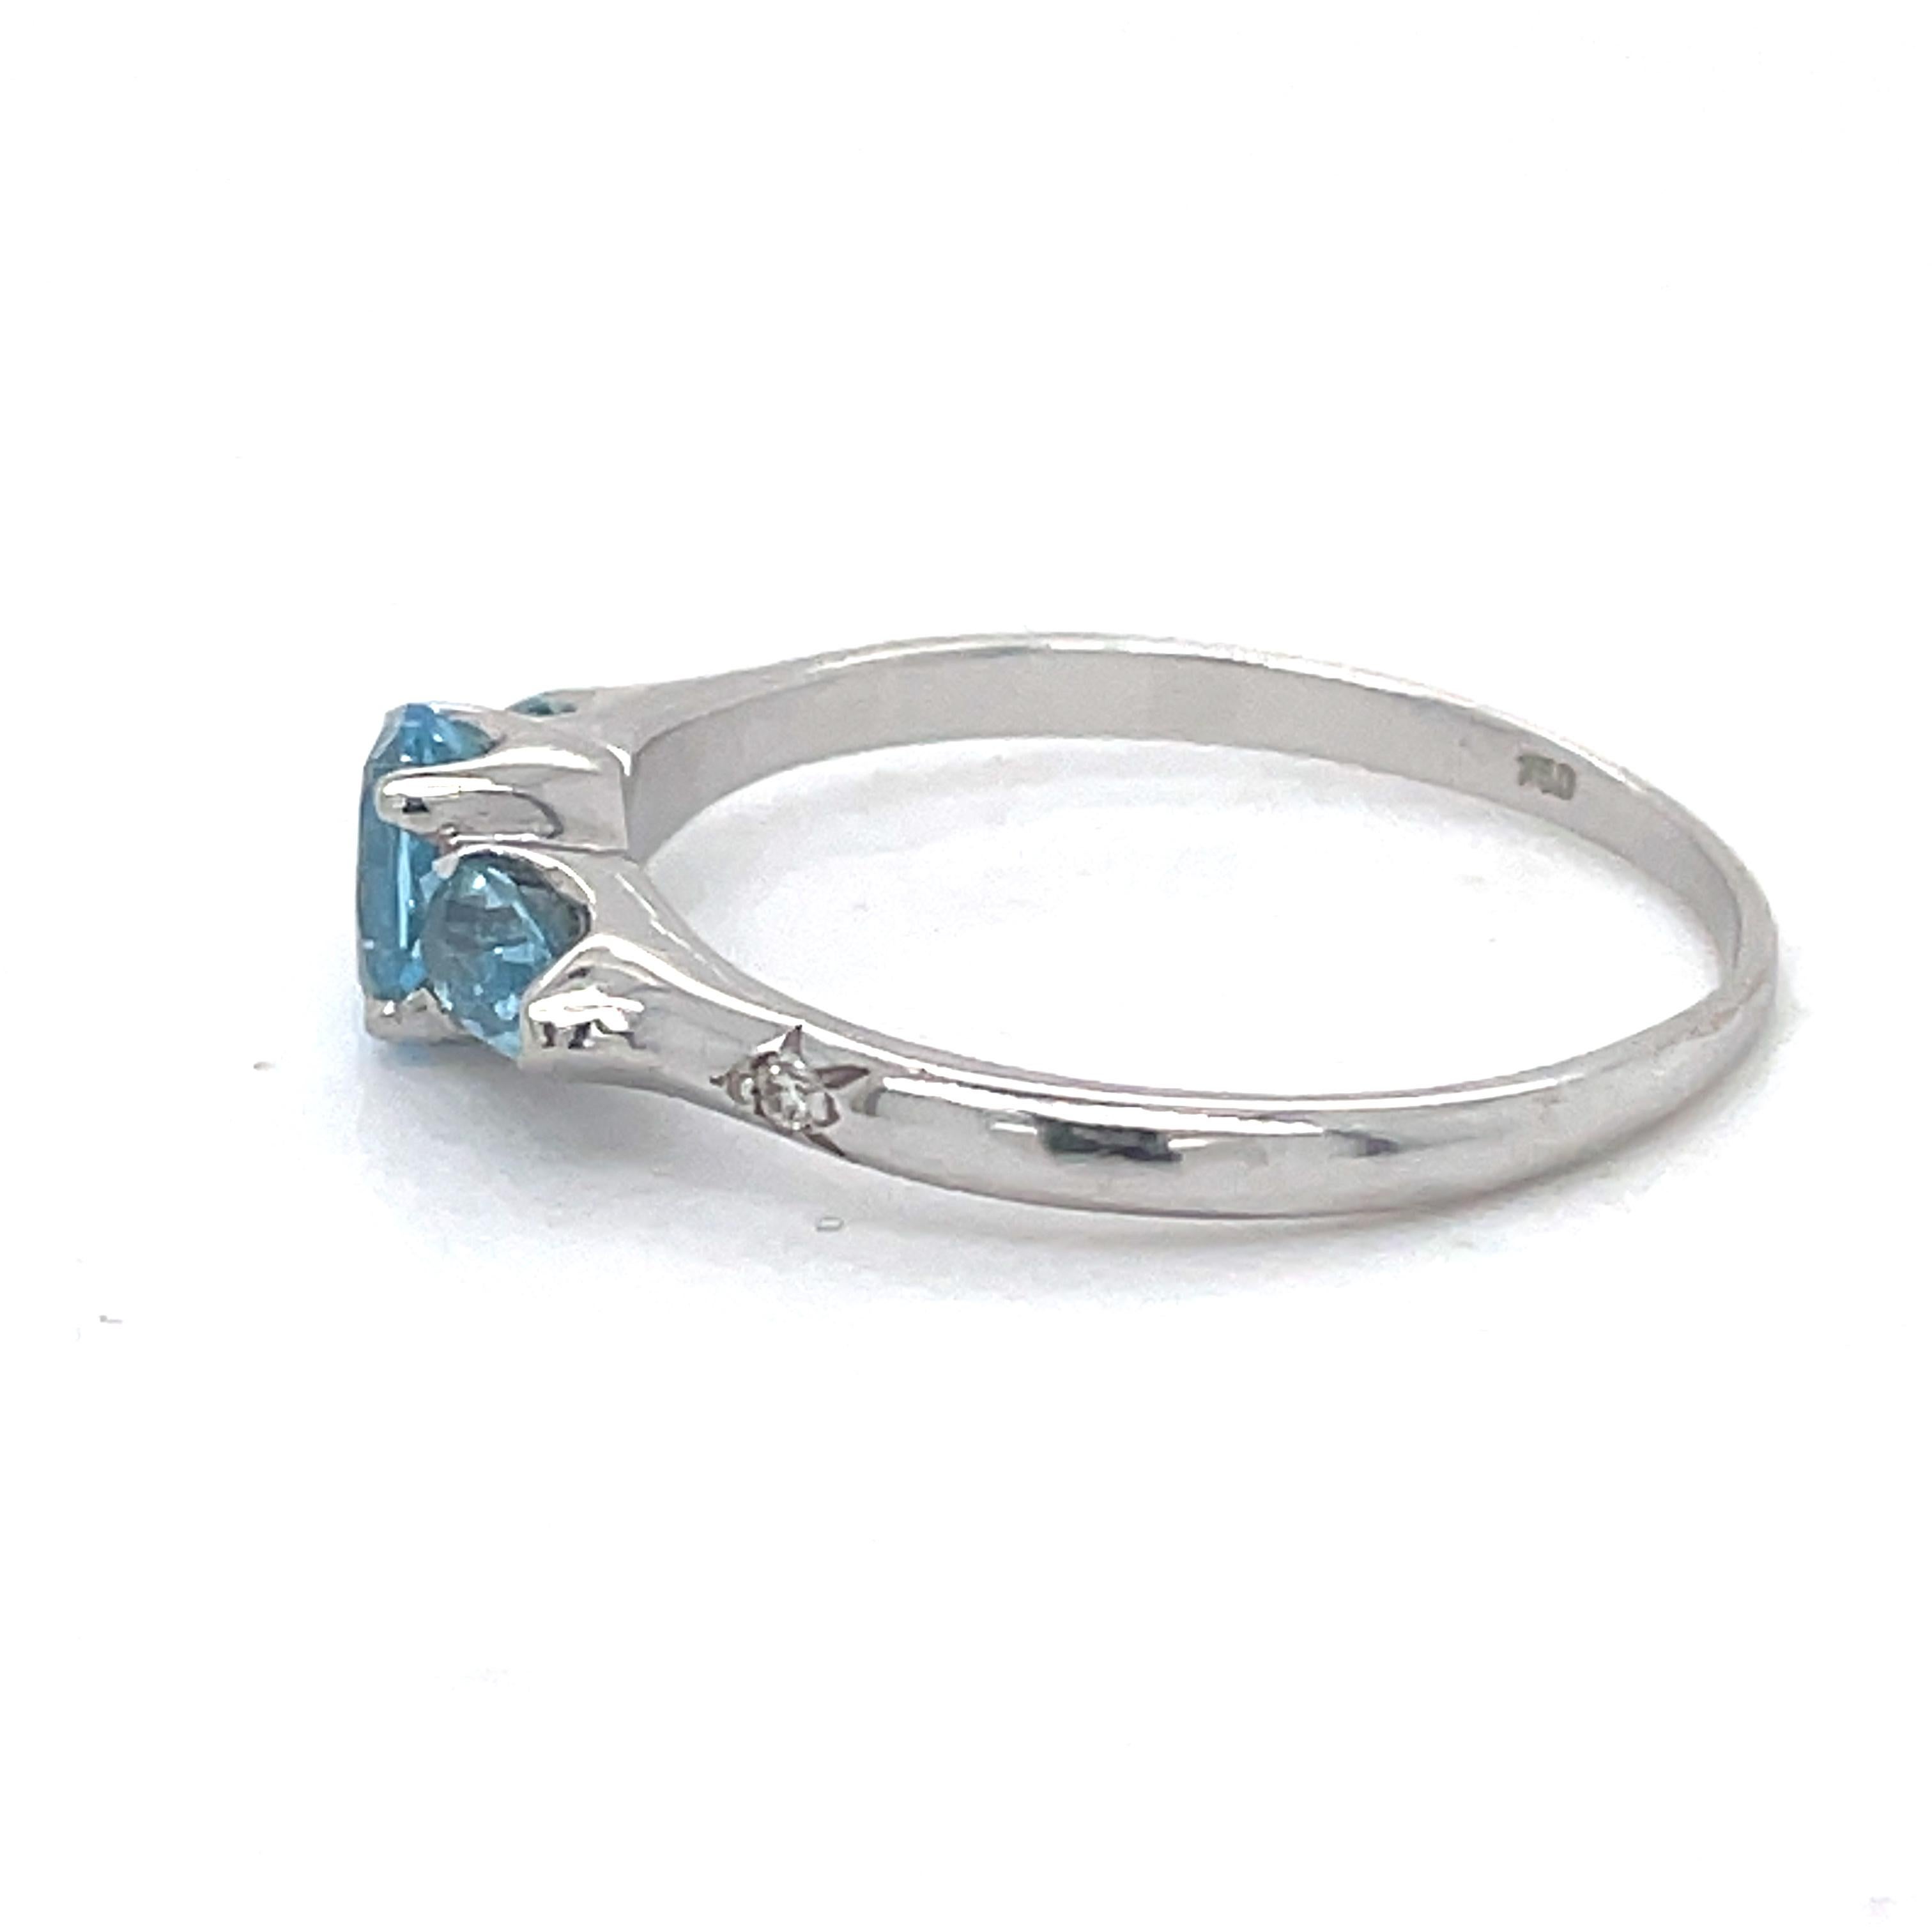 Delicat Blue topaz ring - 1ct Blue Topaz Ring, 18K white gold, 0.01CT diamond  In Excellent Condition For Sale In Ramat Gan, IL